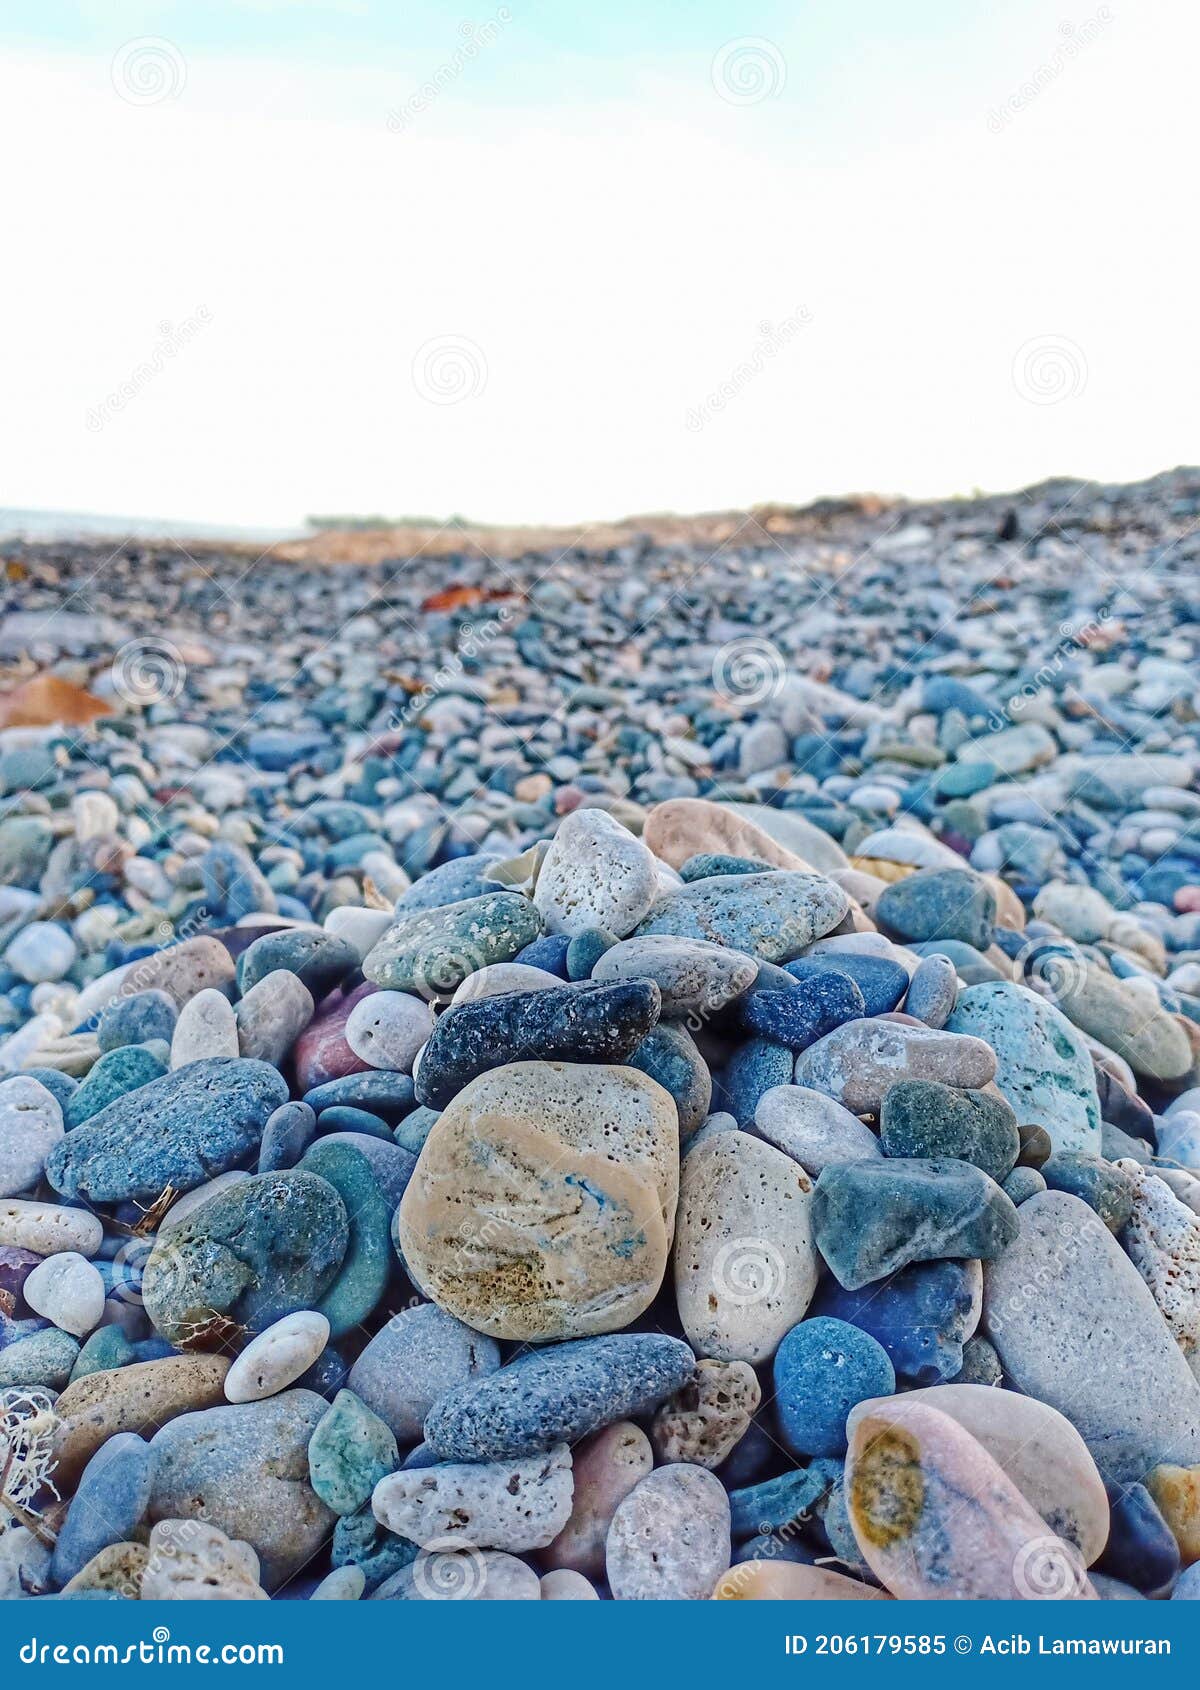 smooth stones on the beach